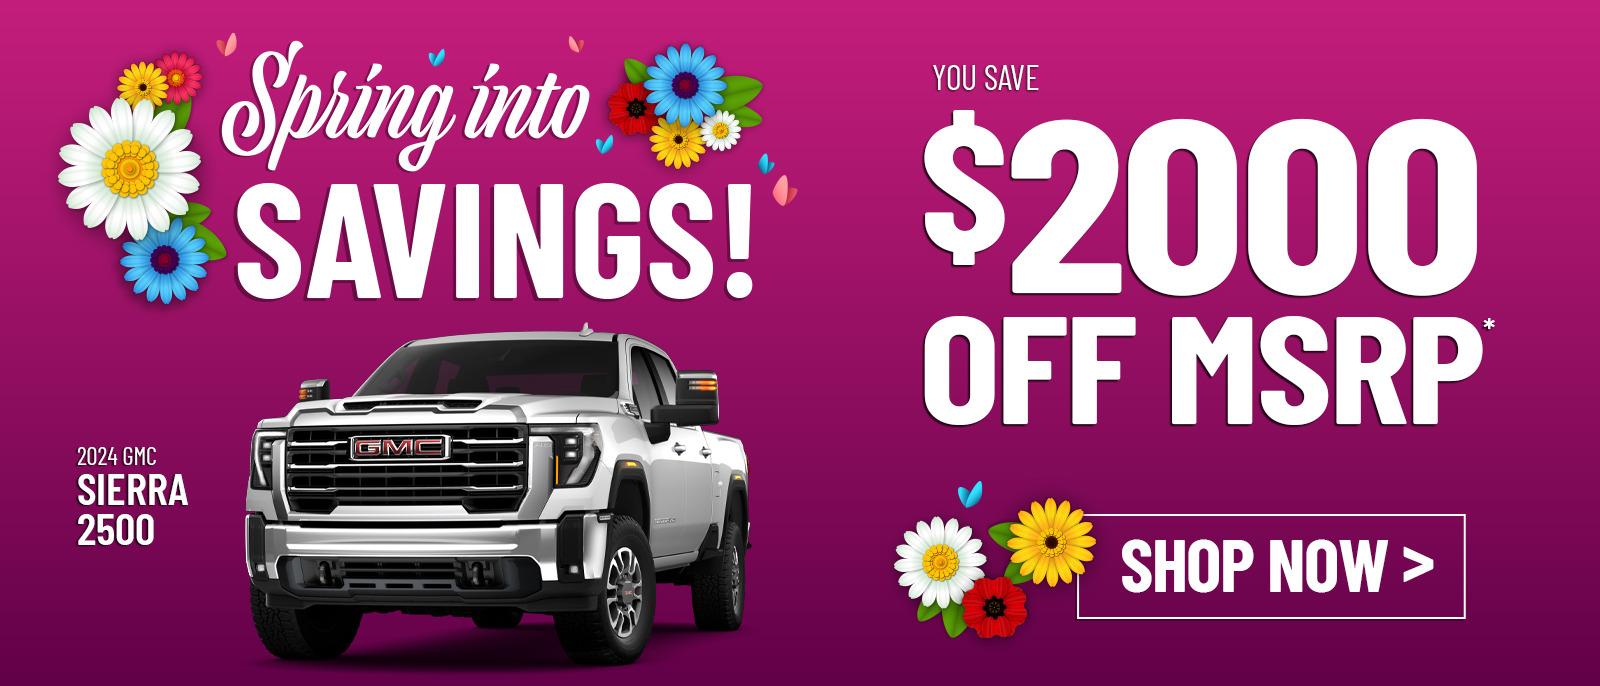 2024 GMC Sierra 2500: You Save $2000 Off MSRP!